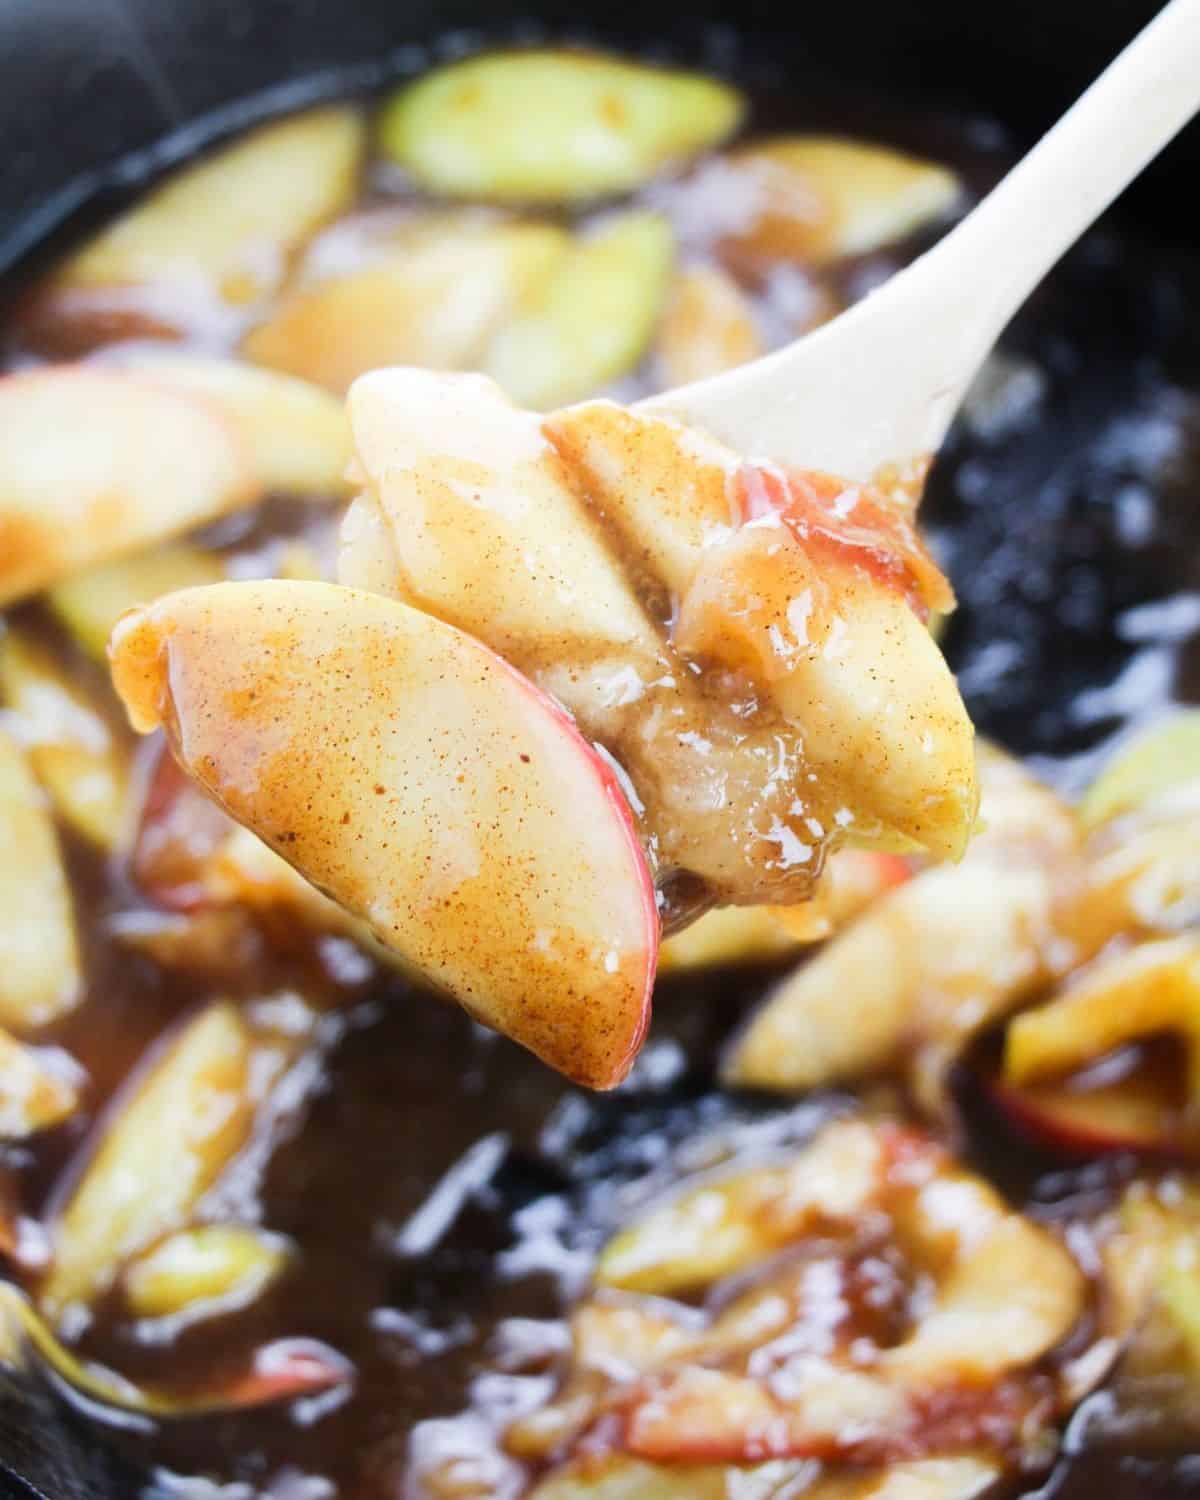 Apples fried in butter and seasoned with apple pie spice on a spoon over a skillet.